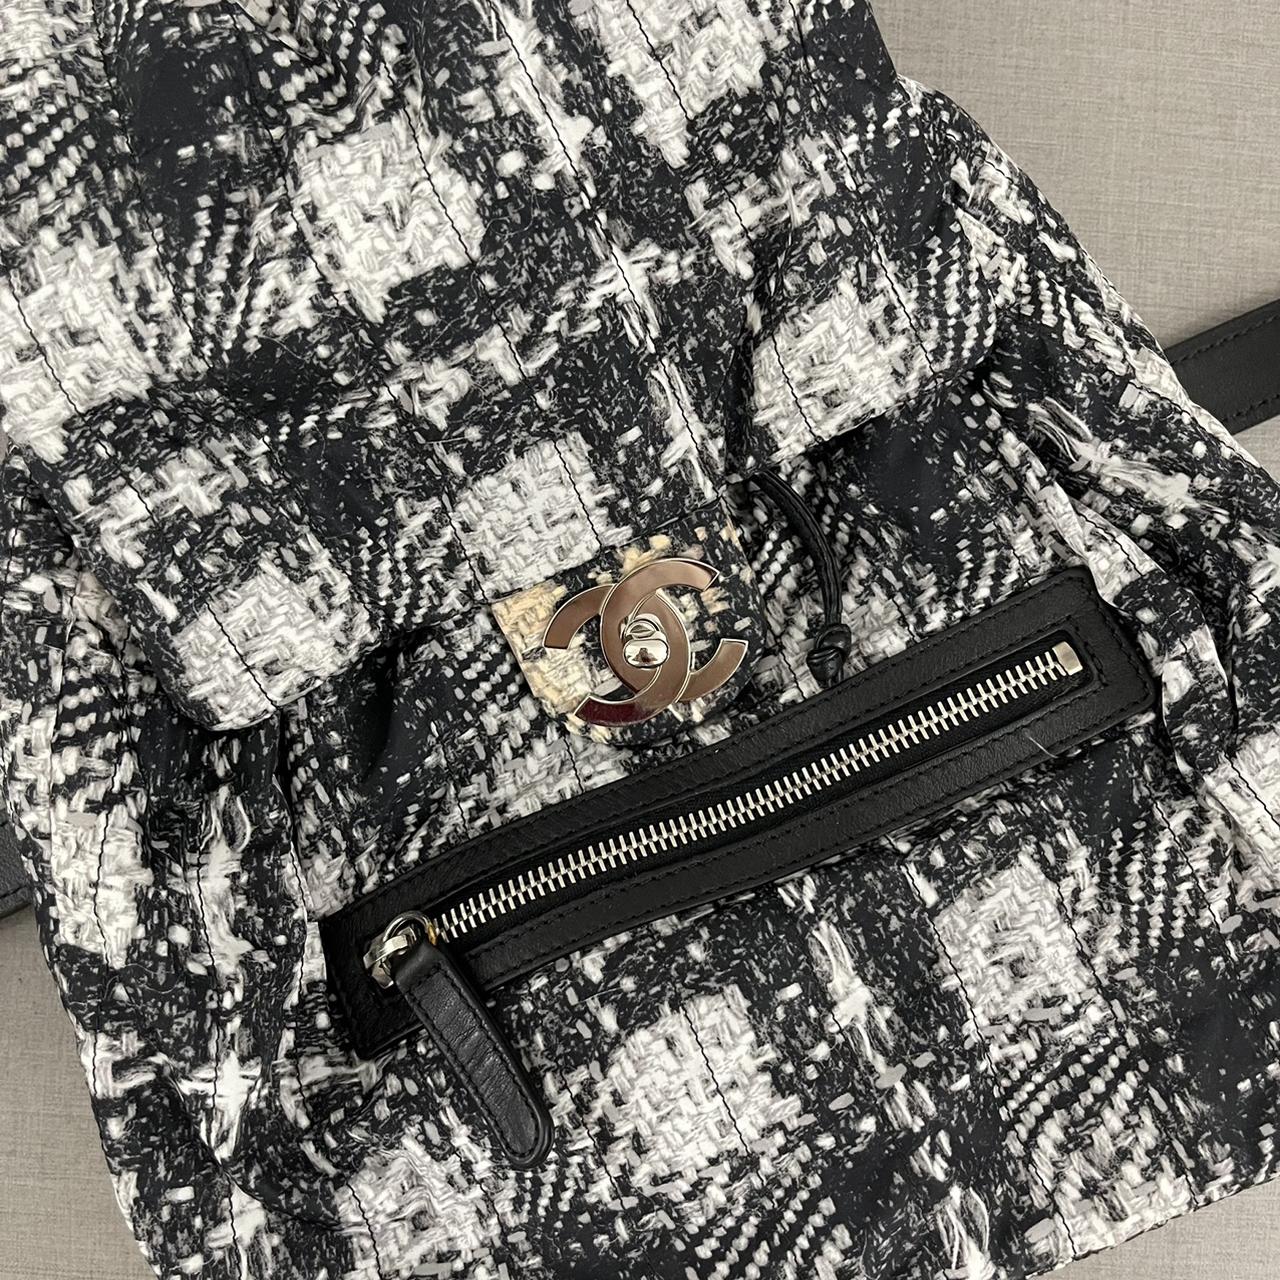 Authentic Chanel backpack , Very good condition